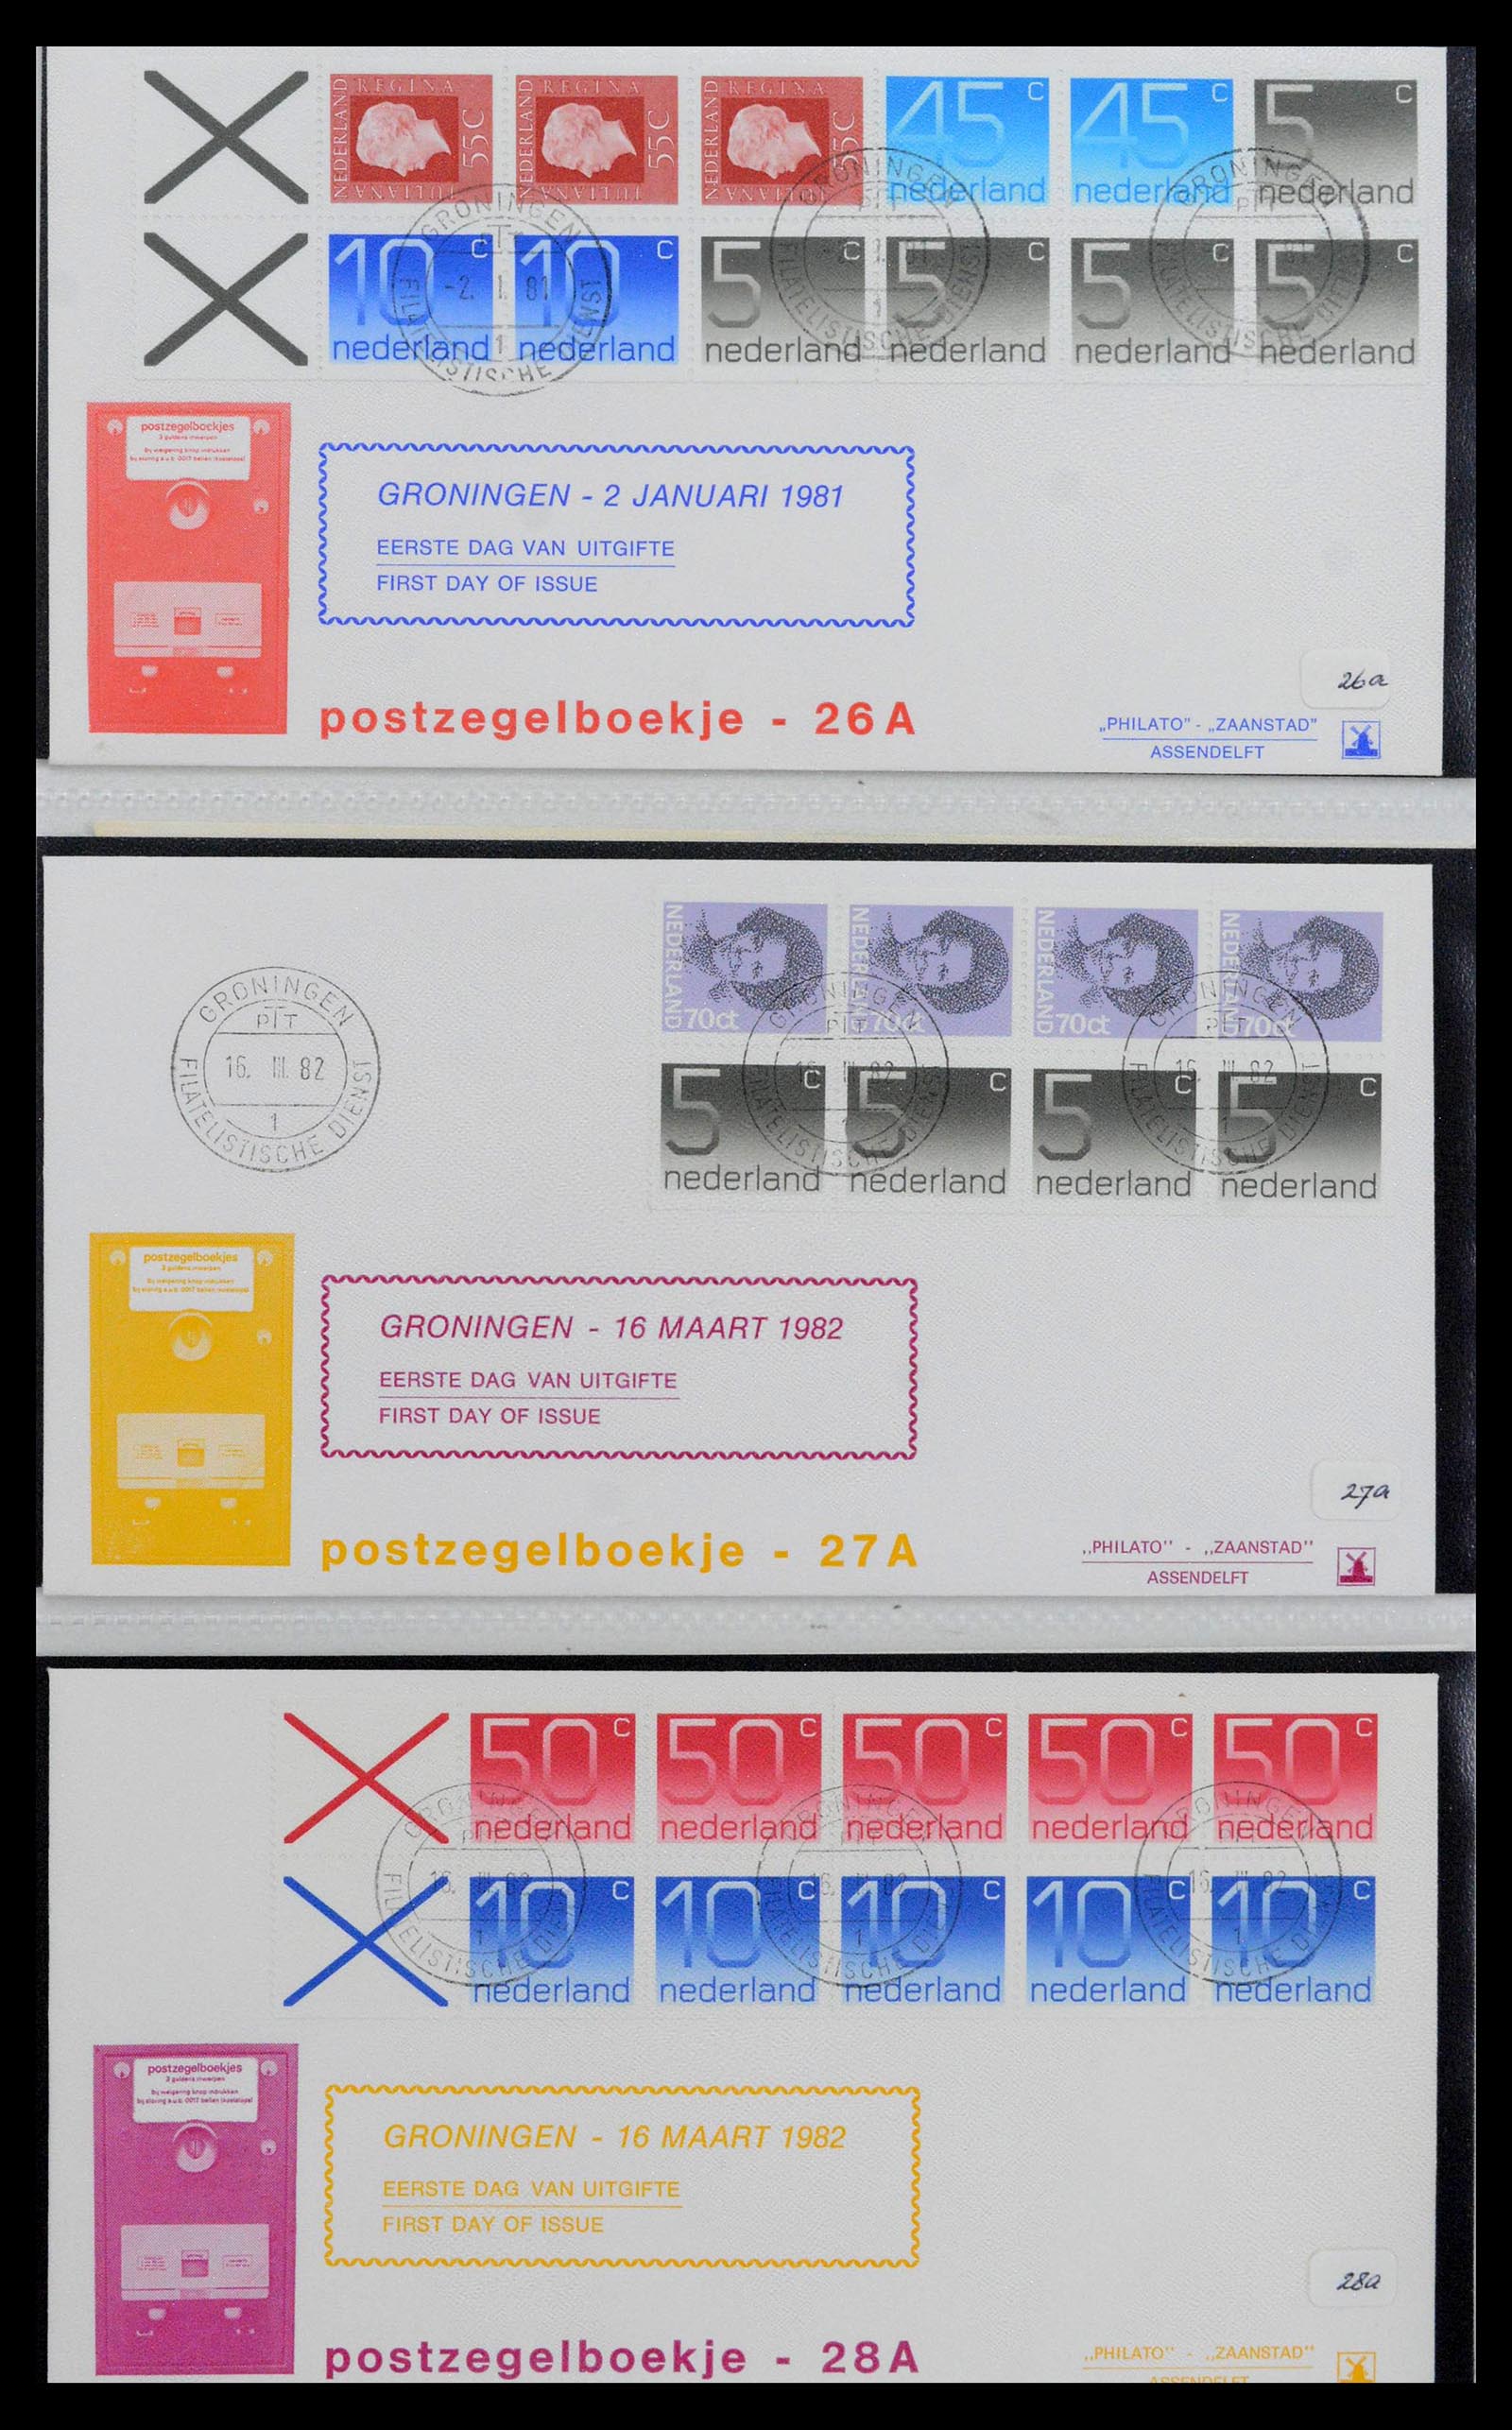 38559 0090 - Stamp collection 38559 Netherlands special first day covers.